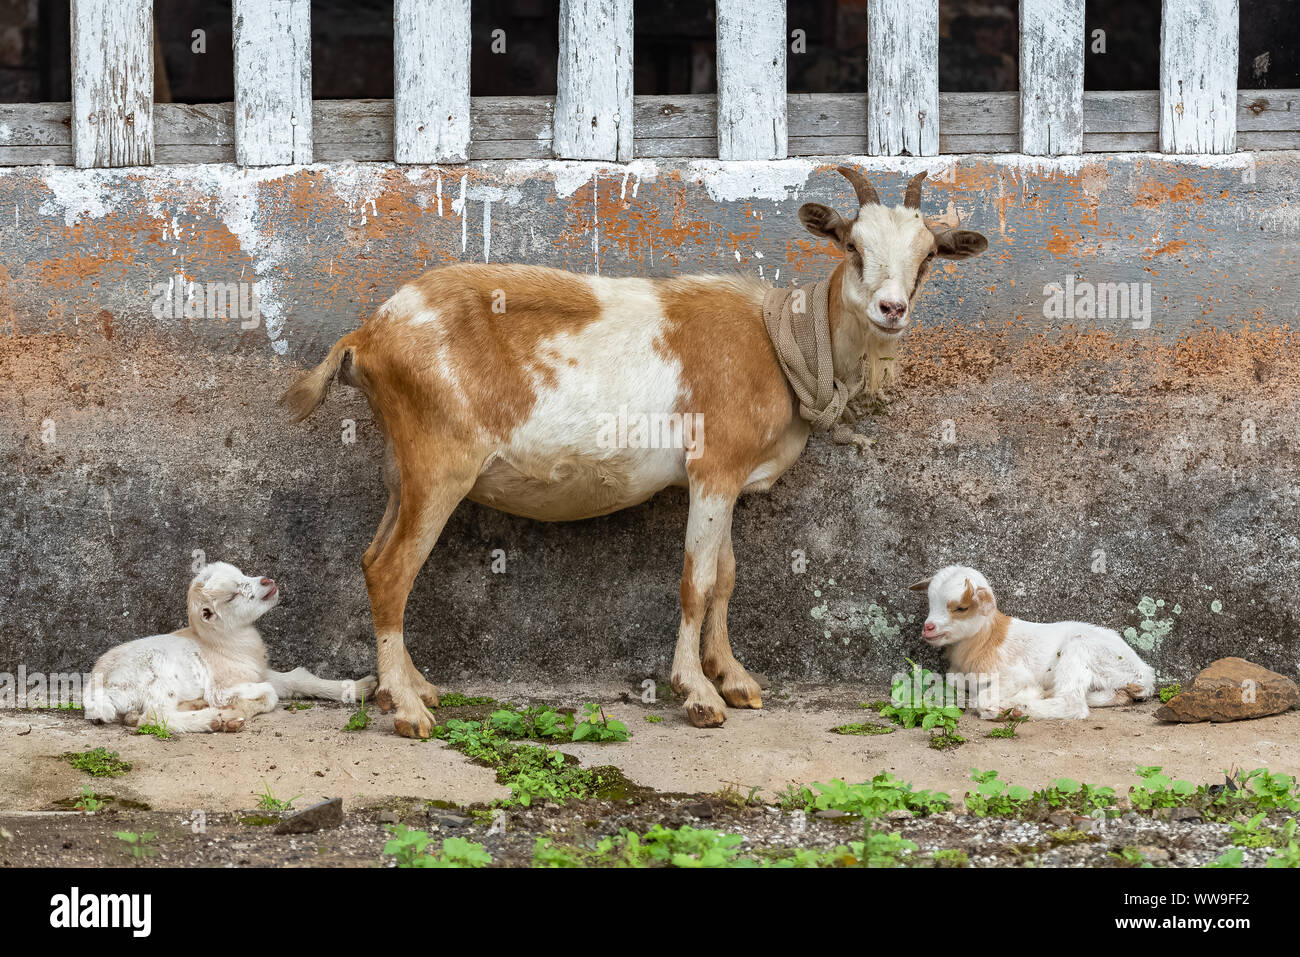 Goat and baby goat, animals in Sao Tome and Principe, in a village Stock Photo